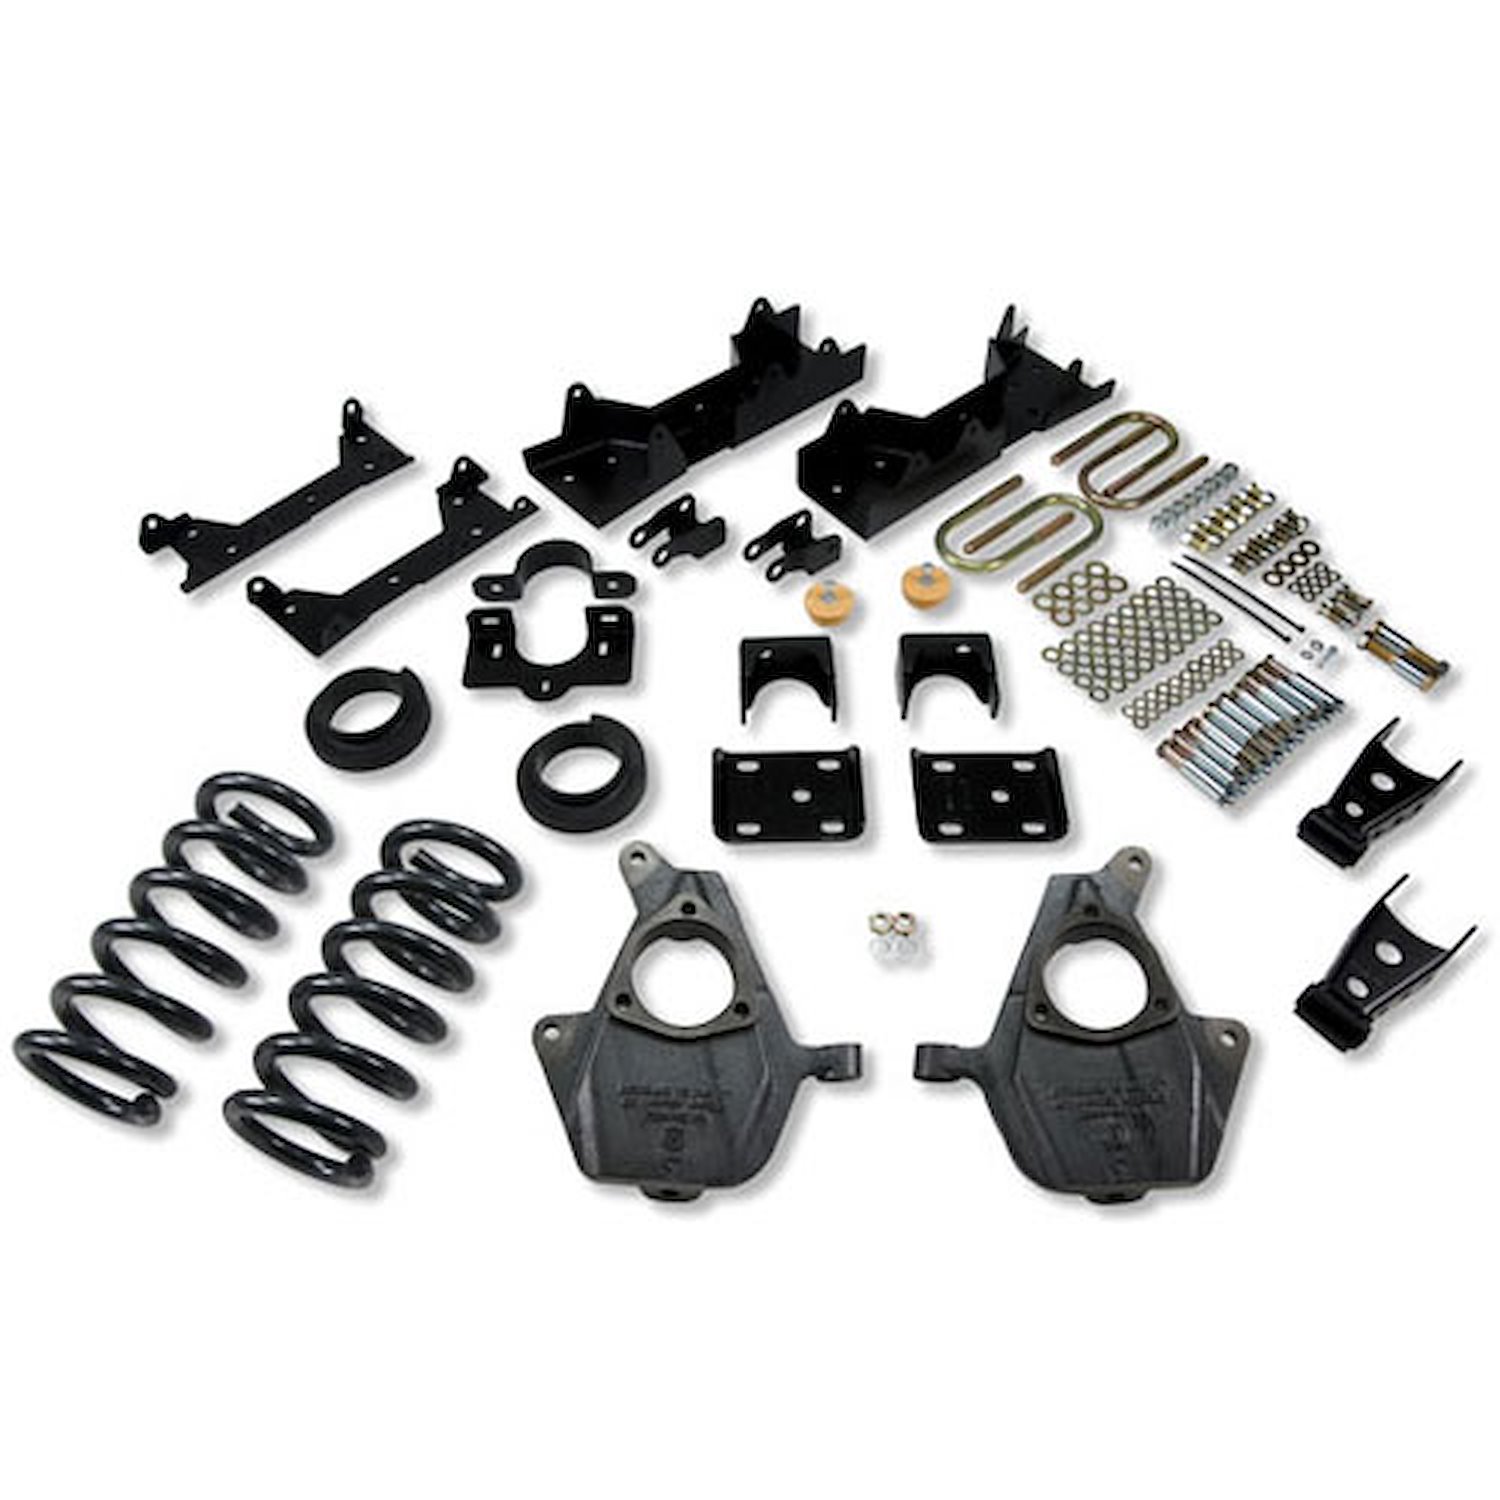 Complete Lowering Kit for 2001-2006 Chevy Silverado/GMC Sierra 1500 Extended Cab